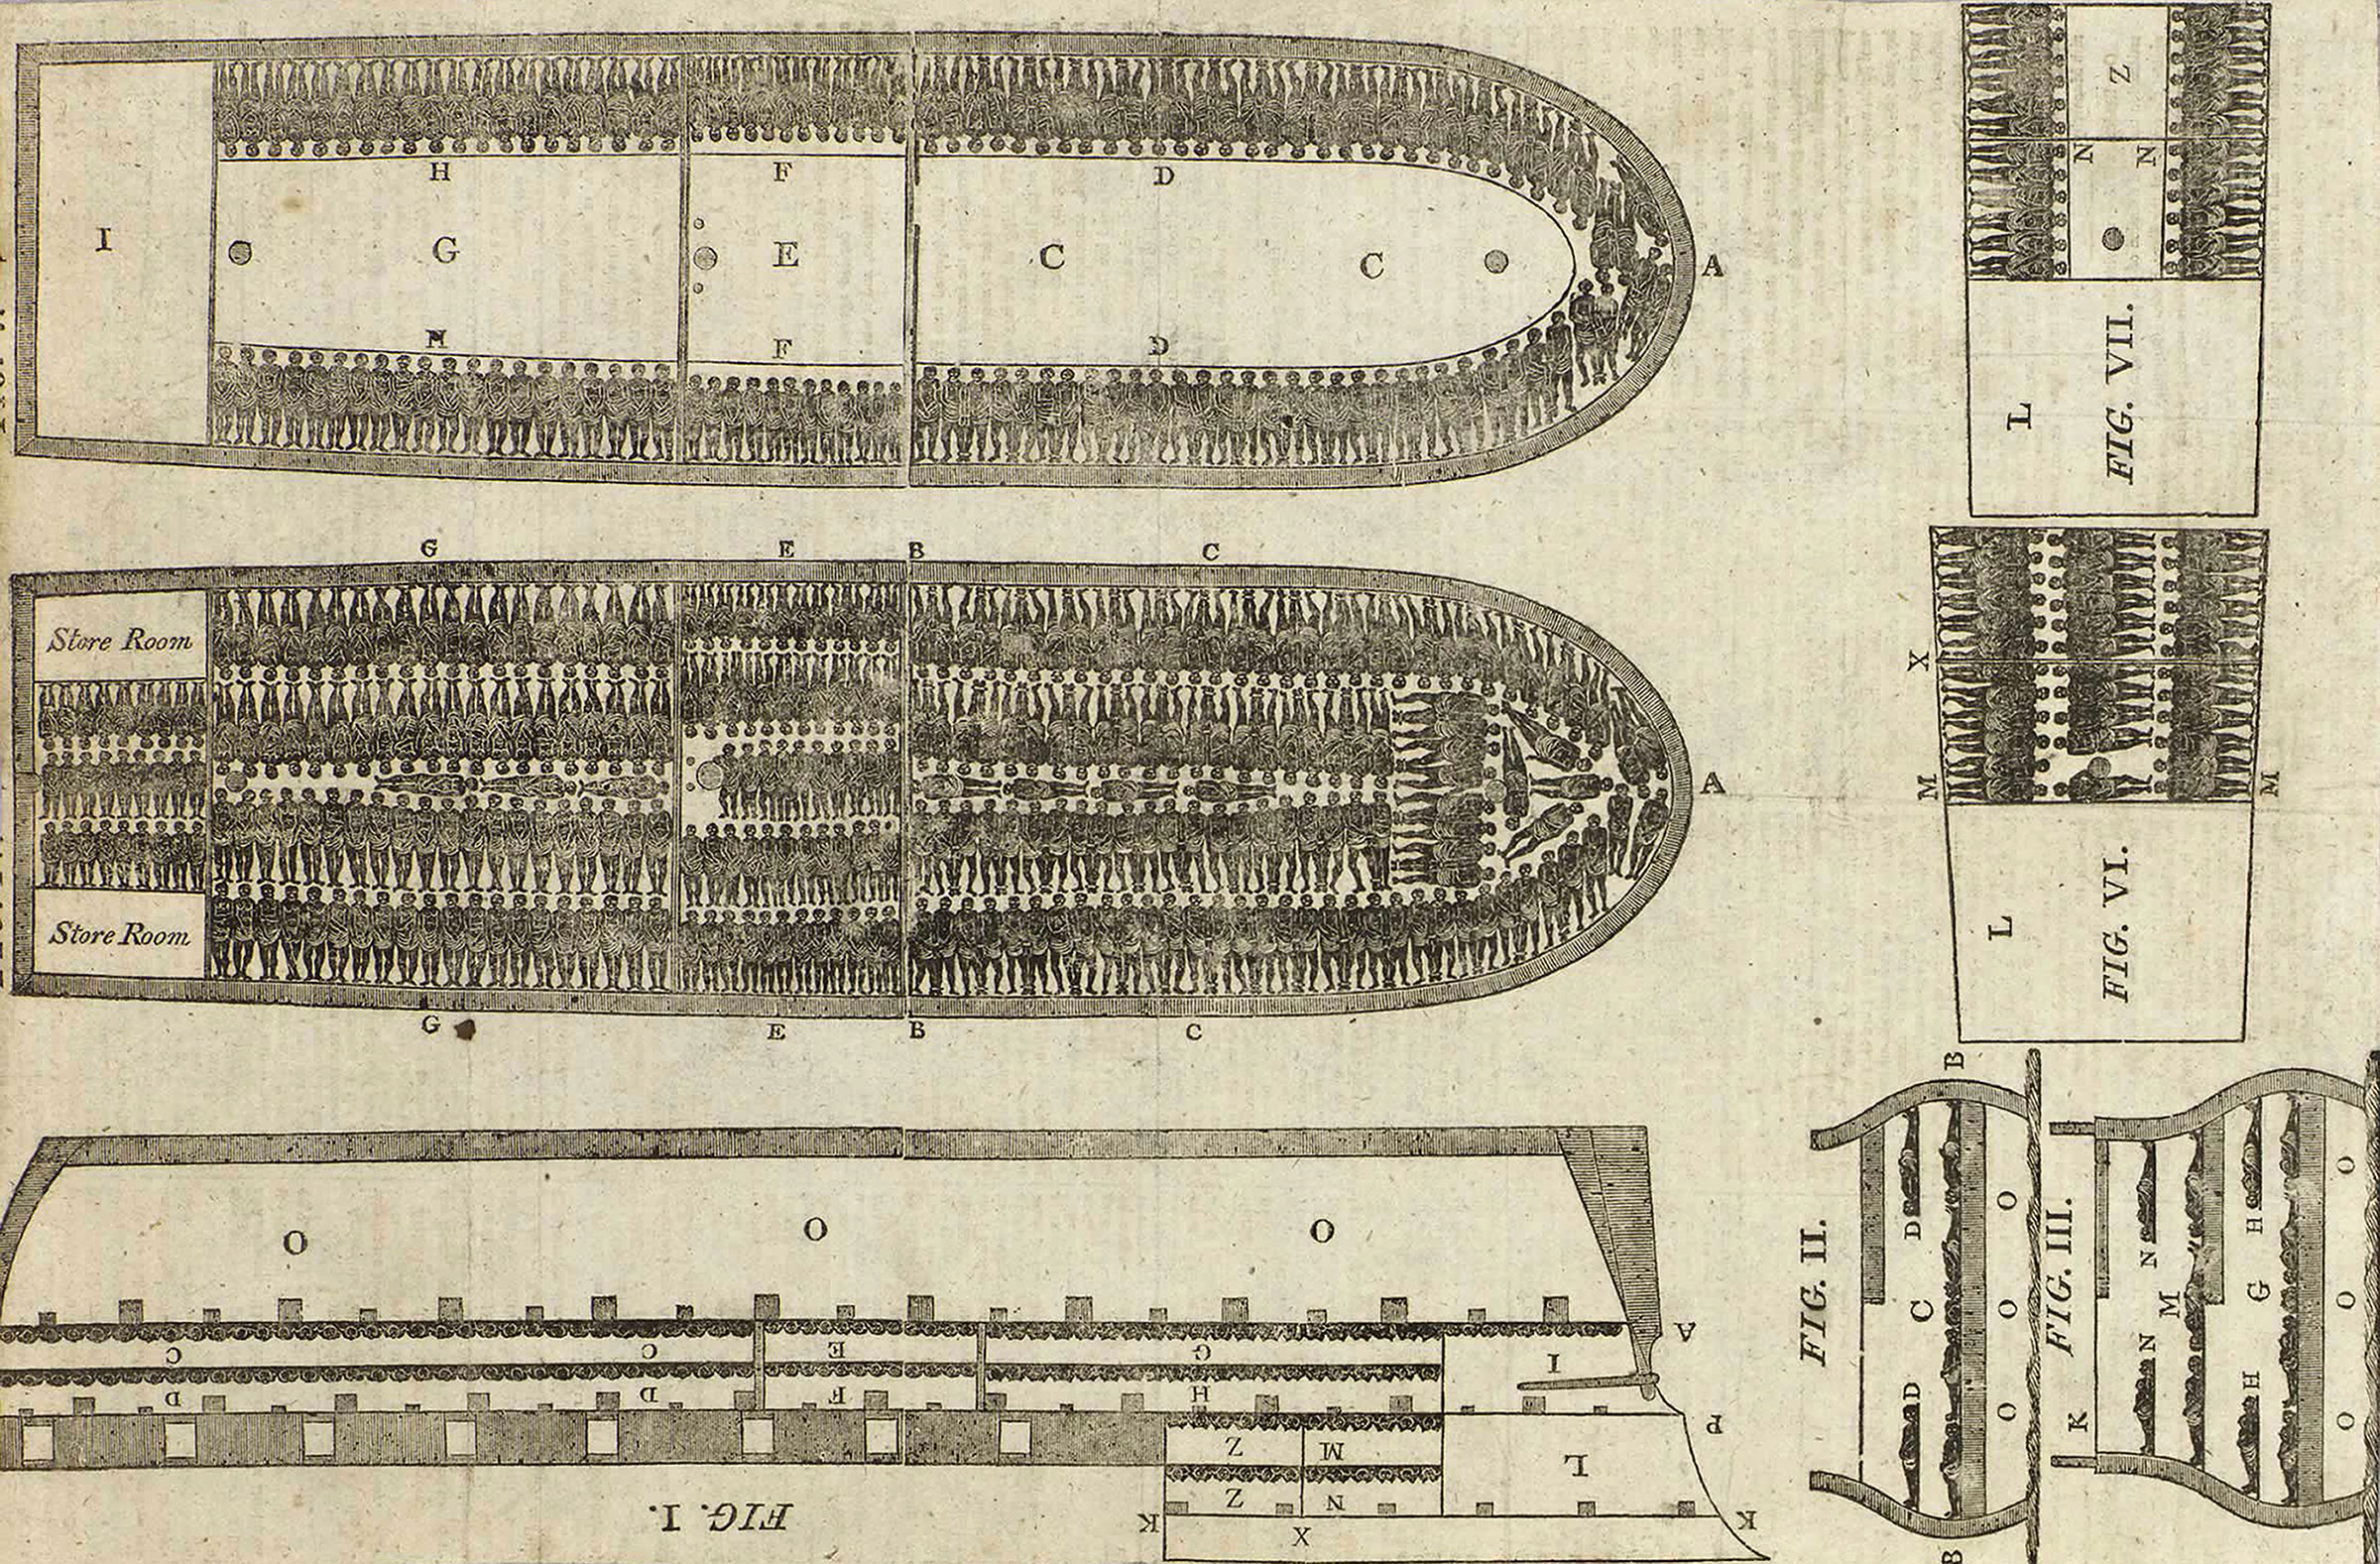 Engraving of the stowage plans of the slave ship Brooks, 1814. (GraphicaArtis/Getty Images)